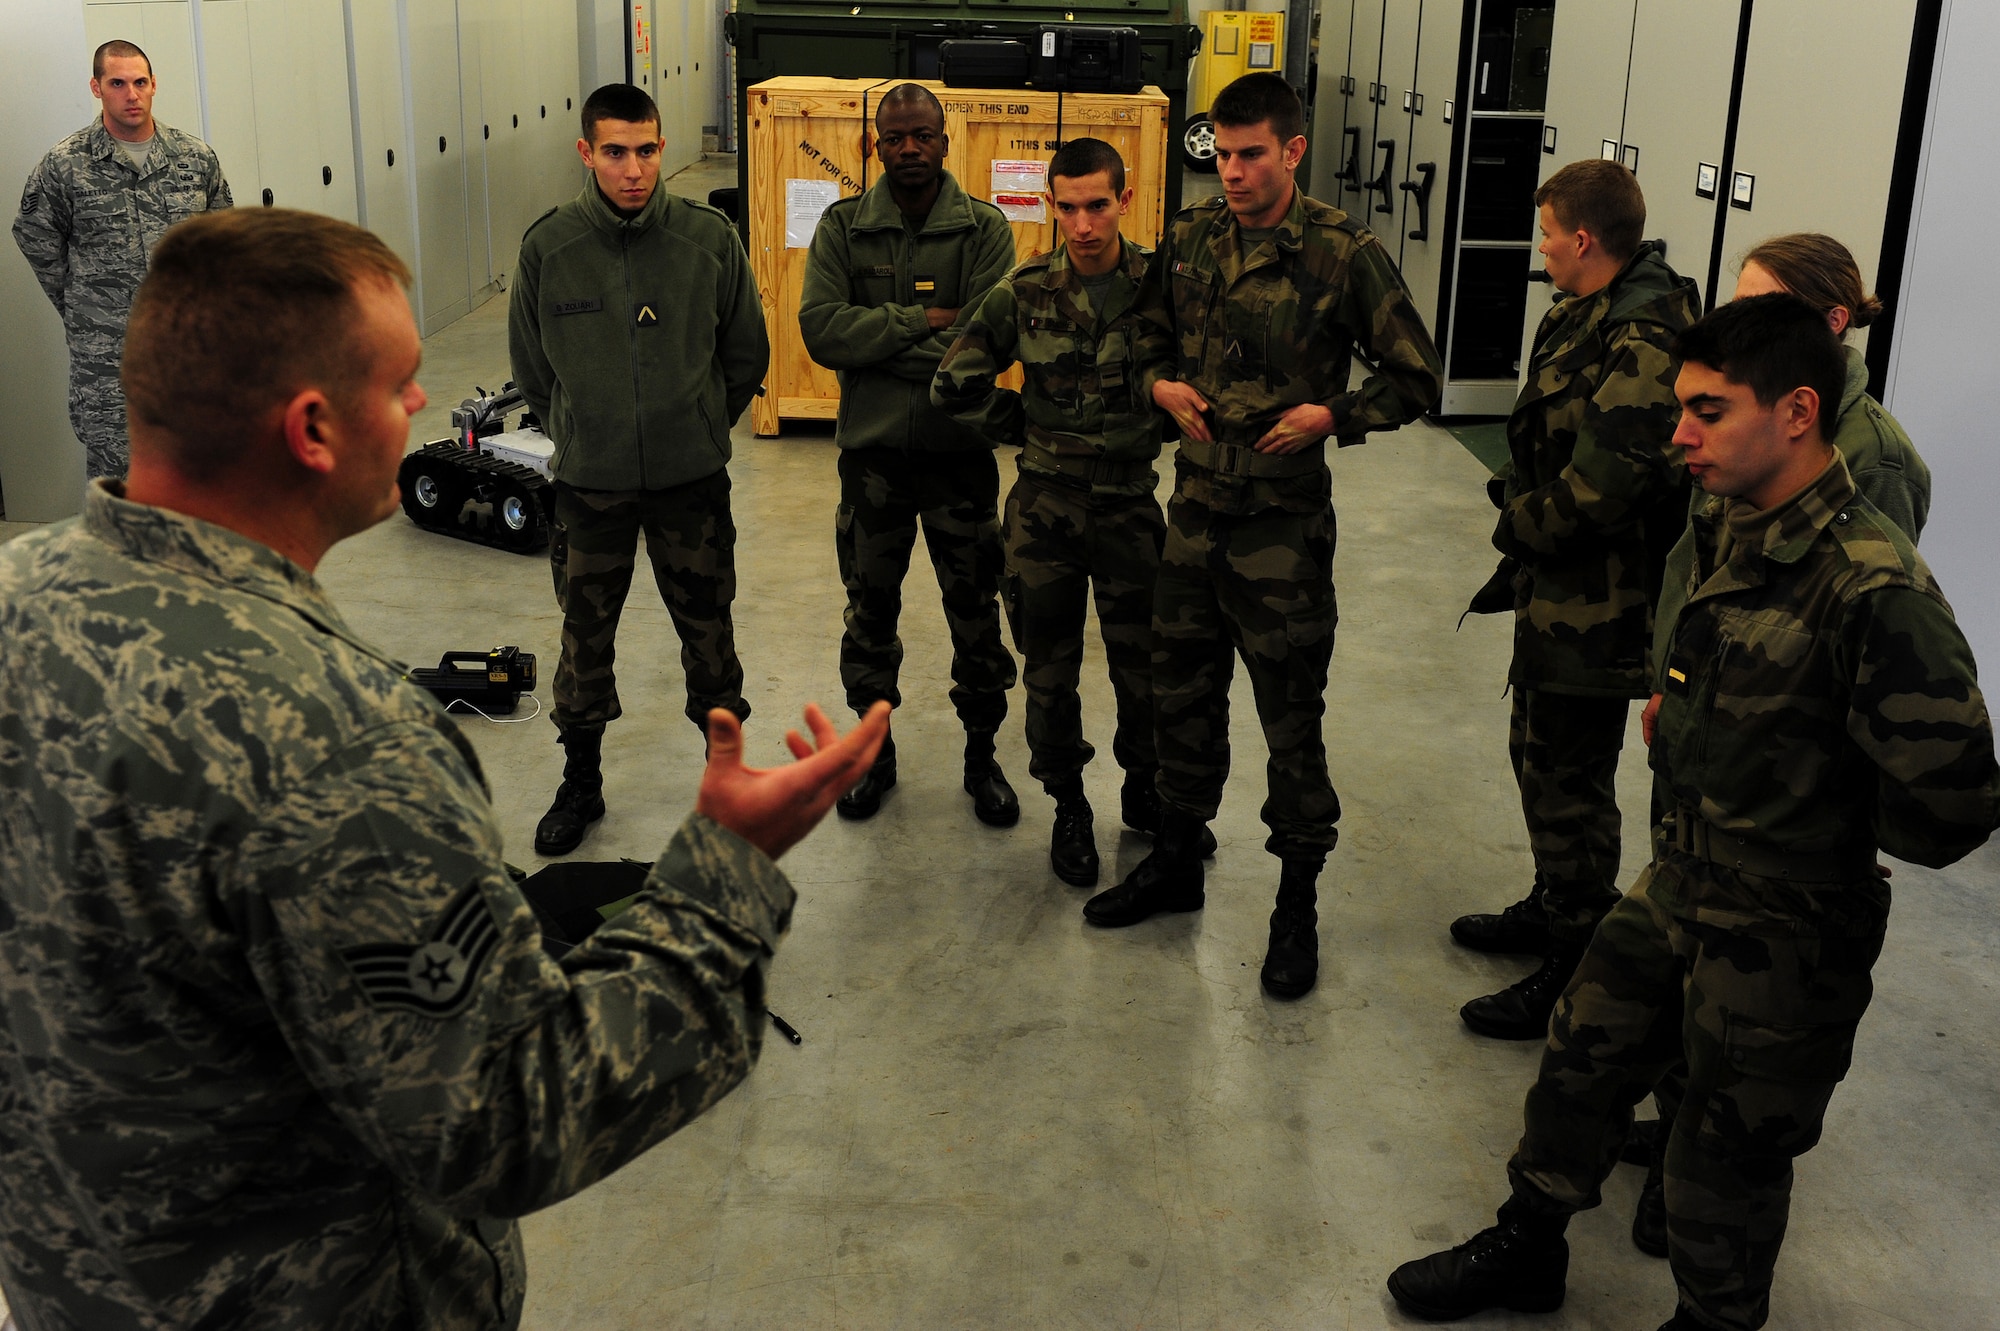 U.S. Air Force Staff Sgt. Kristopher Parker, 886th Civil Engineer Squadron, briefs French air force cadets on the various robots used as a Explosive Ordnance Disposal technician, Ramstein Air Base, Germany, Nov. 16, 2010. The cadets will be visiting several locations on base during the tour.(U.S. Air Force photo by Airman 1st Class Brea Miller)